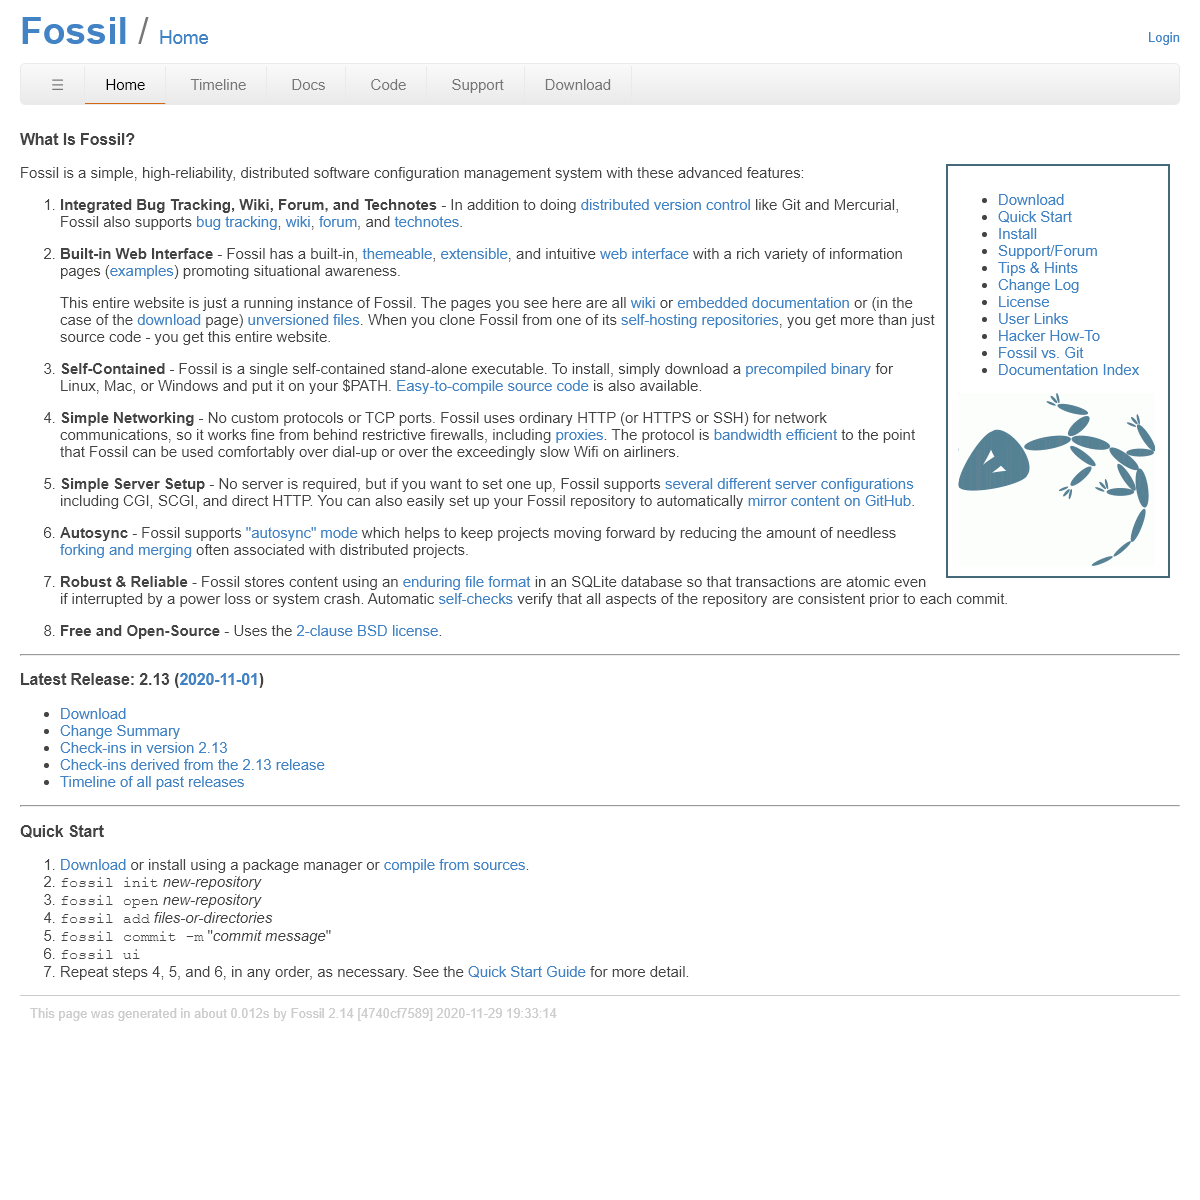 A complete backup of fossil-scm.org